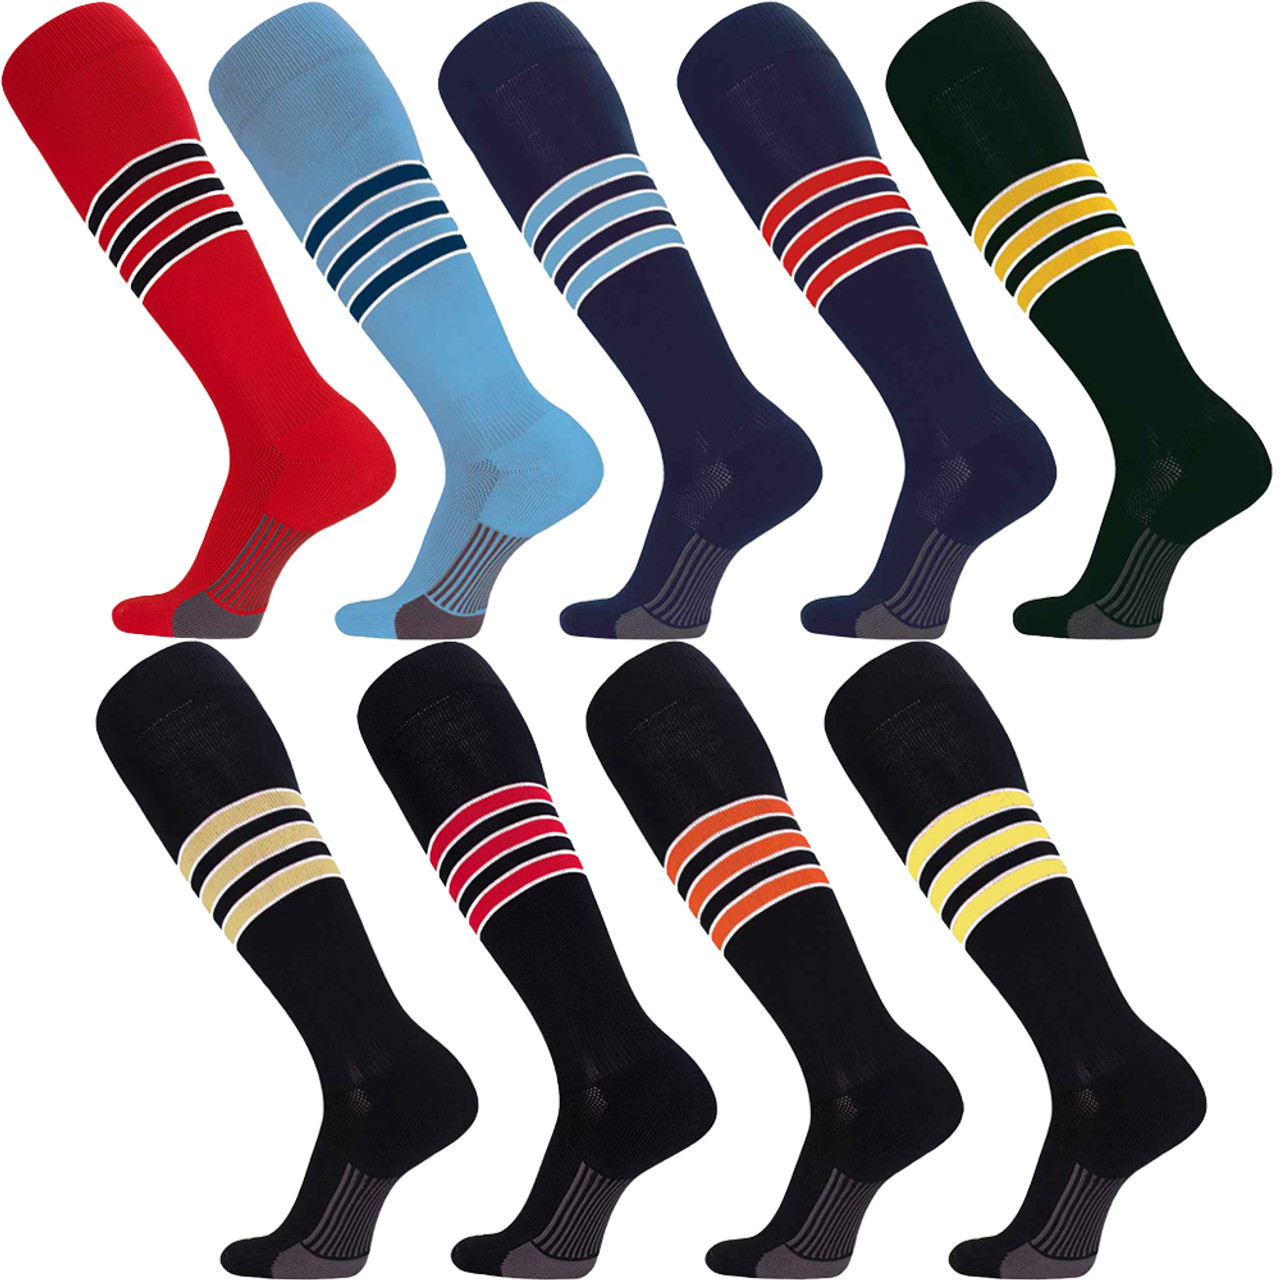 Twin City Dugout Series Over The Calf Baseball Socks Style D - Bases Loaded